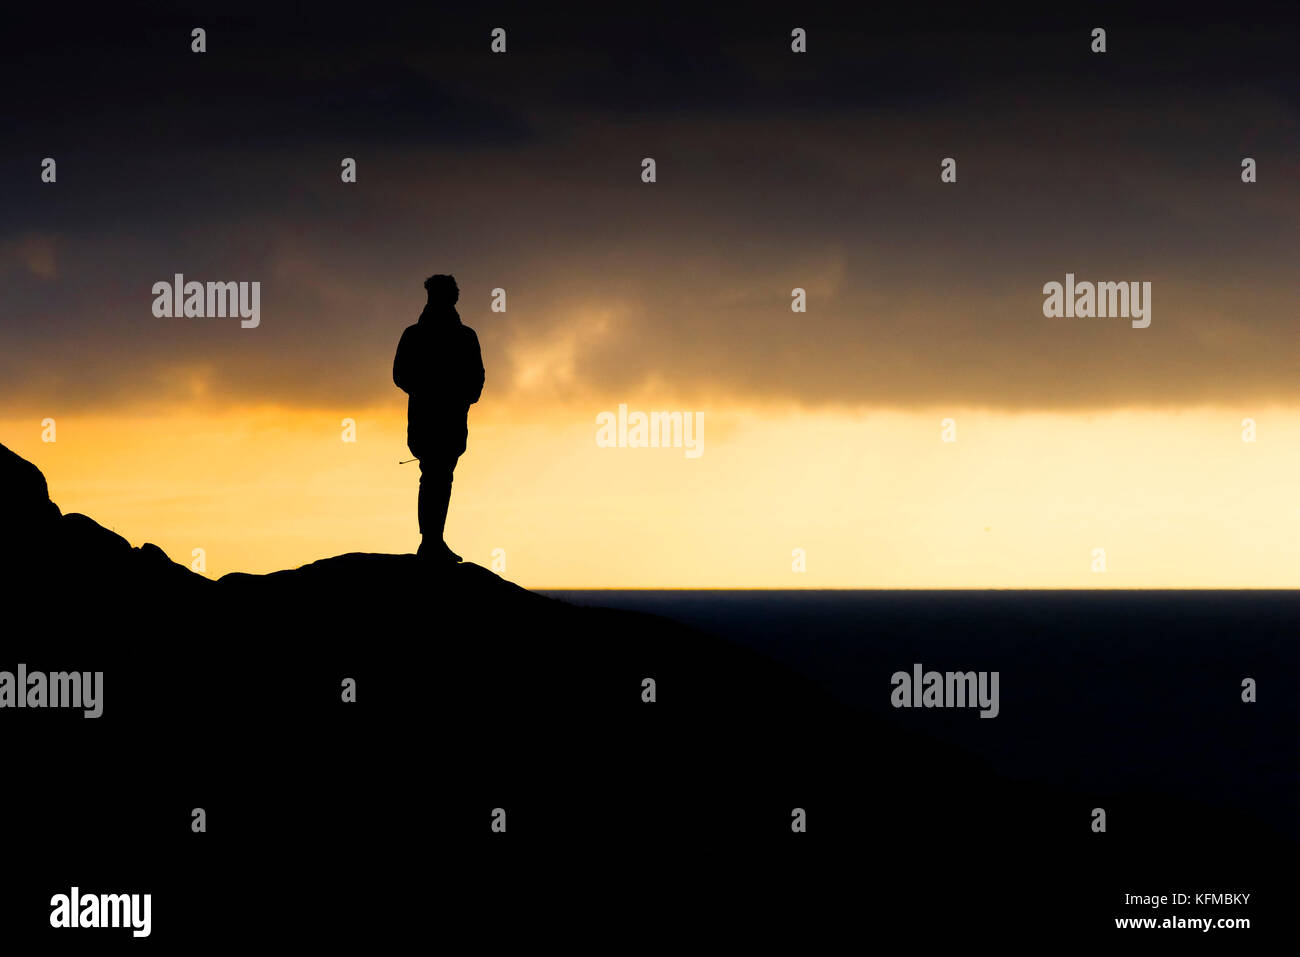 Silhouette - a solitary man silhouetted against the evening light. Stock Photo